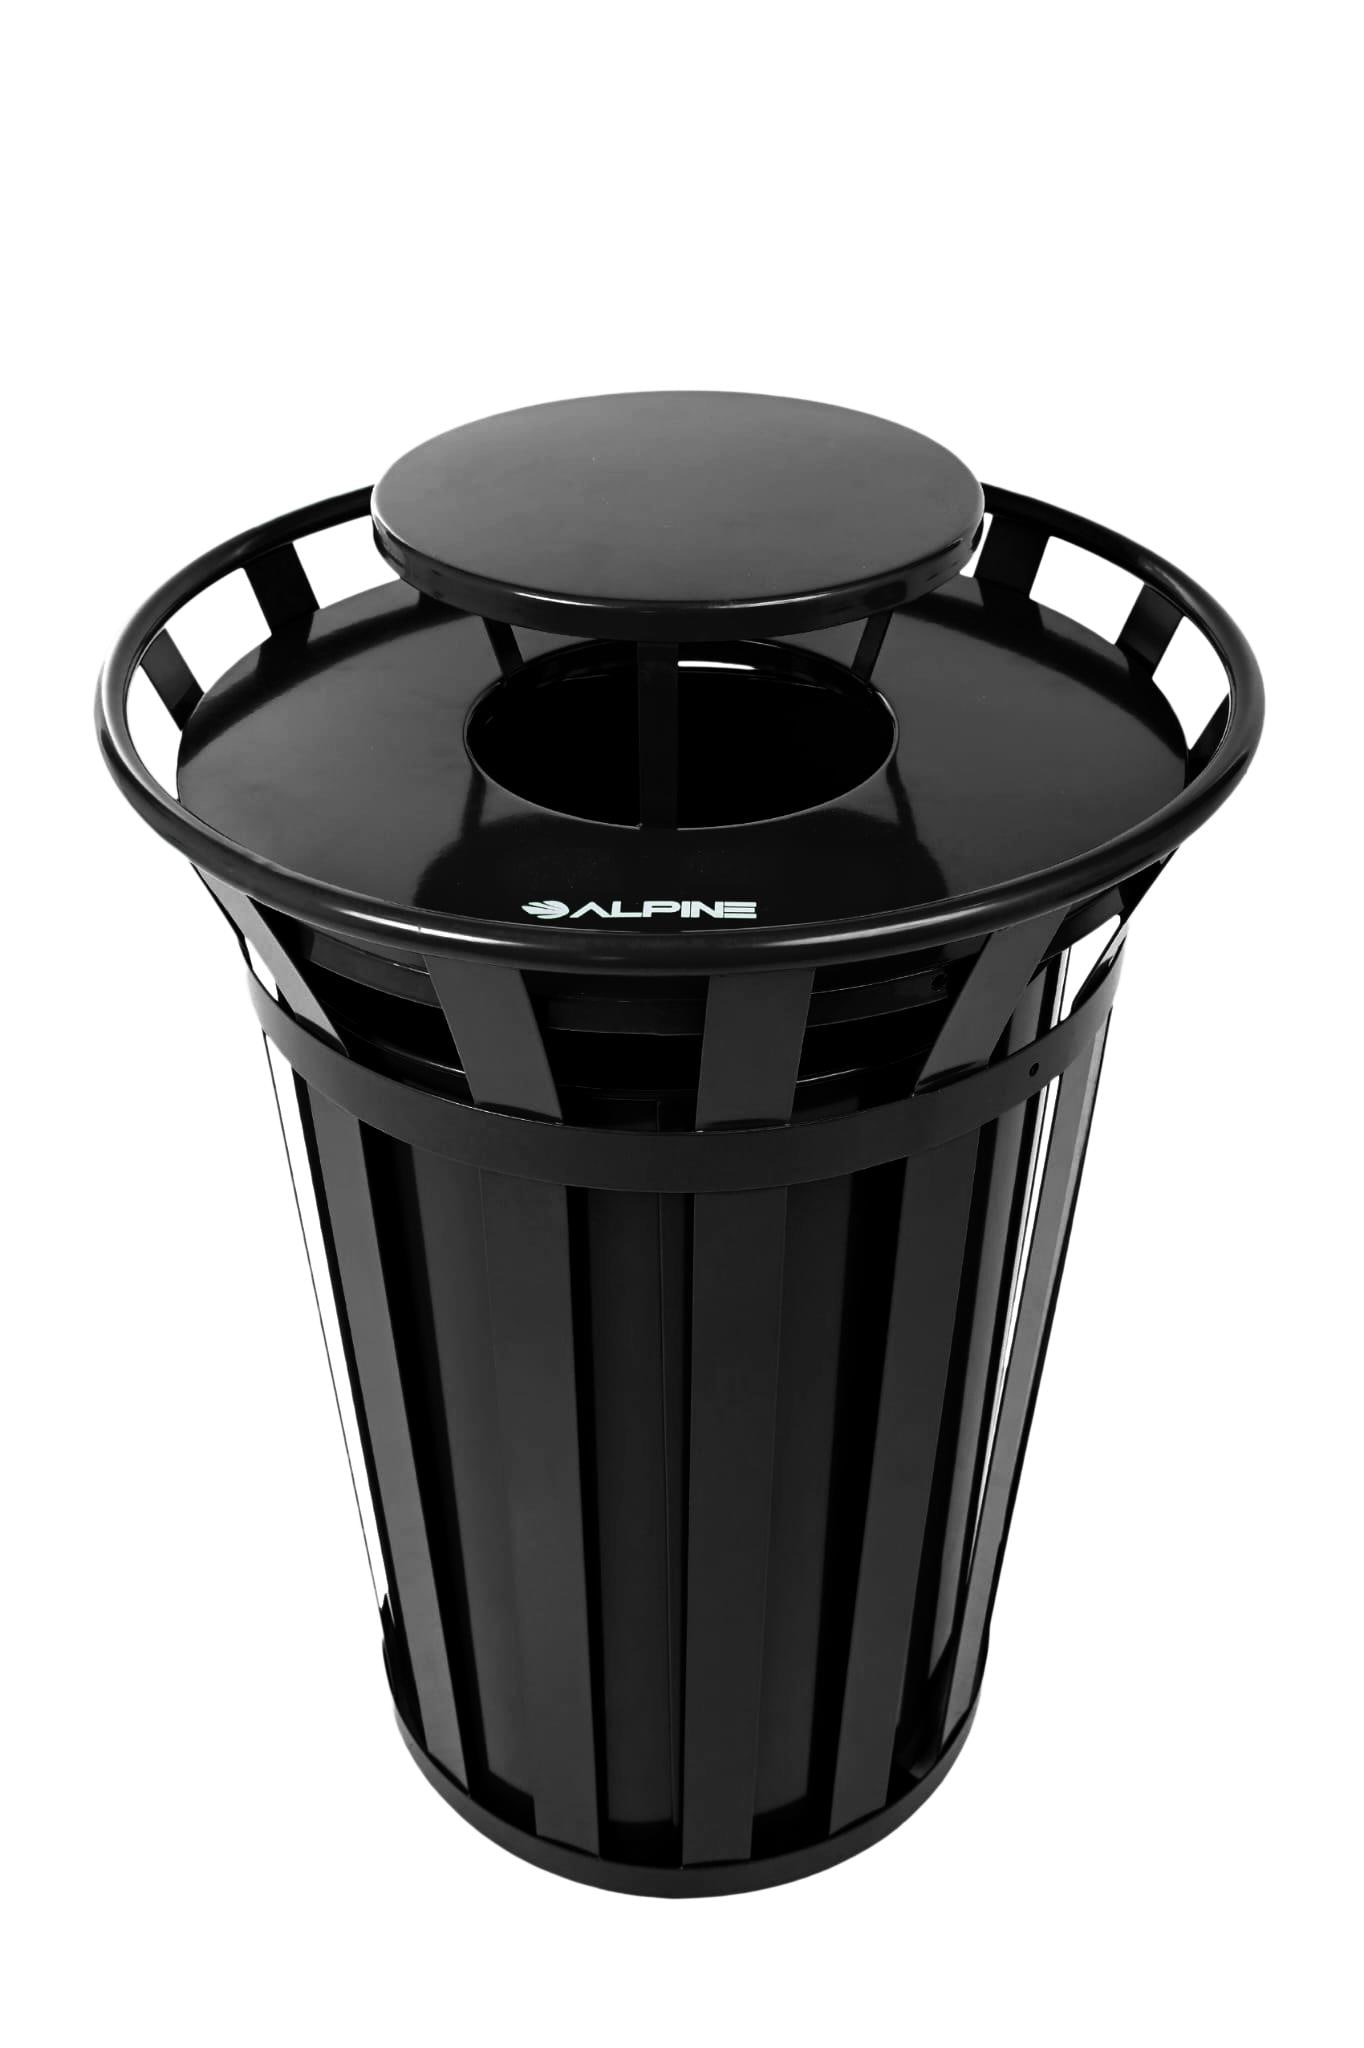 Outdoor Trash Cans & Commercial Outdoor Garbage Bins at the Best Prices